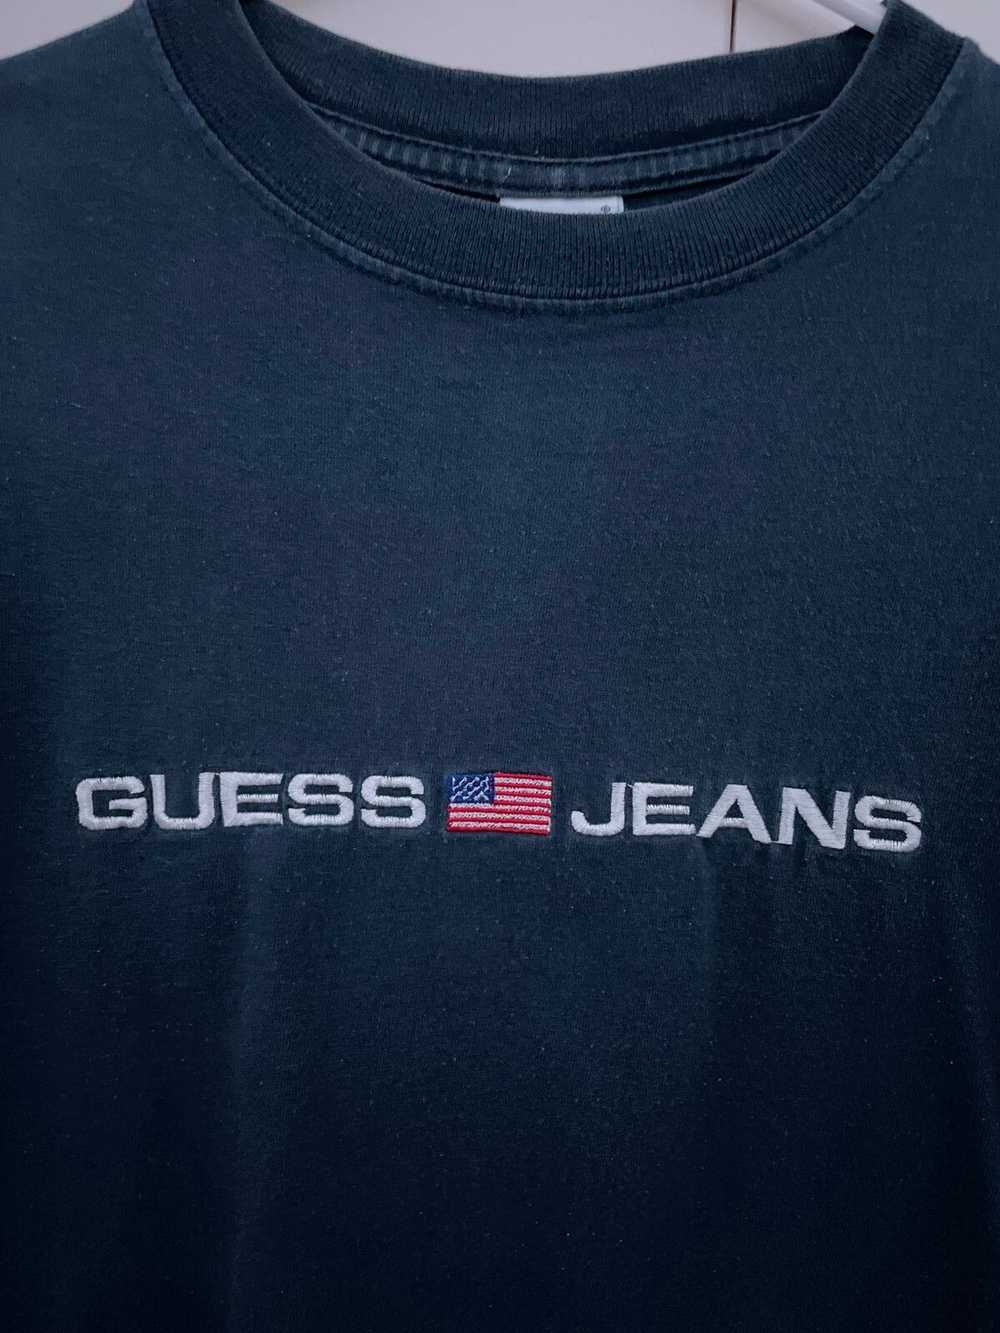 Guess × Vintage Vintage 90s Guess Jeans Tee - image 3